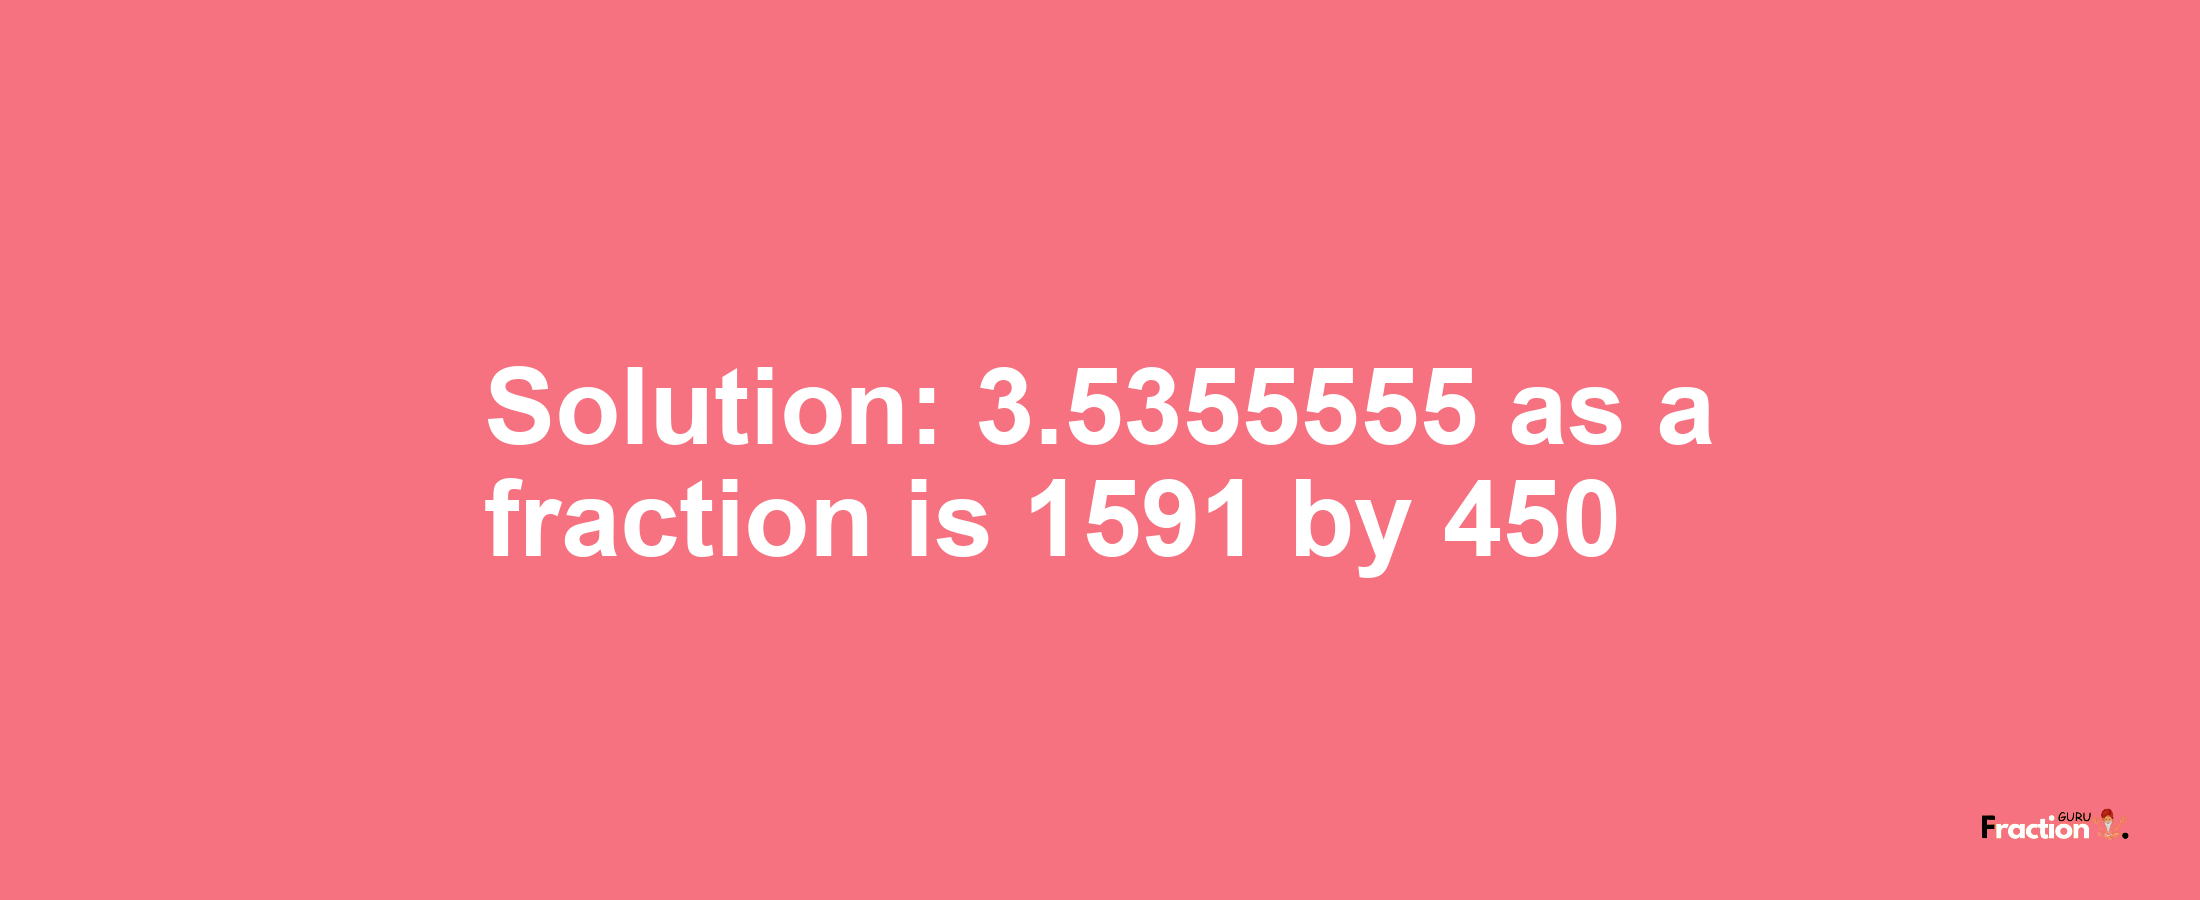 Solution:3.5355555 as a fraction is 1591/450